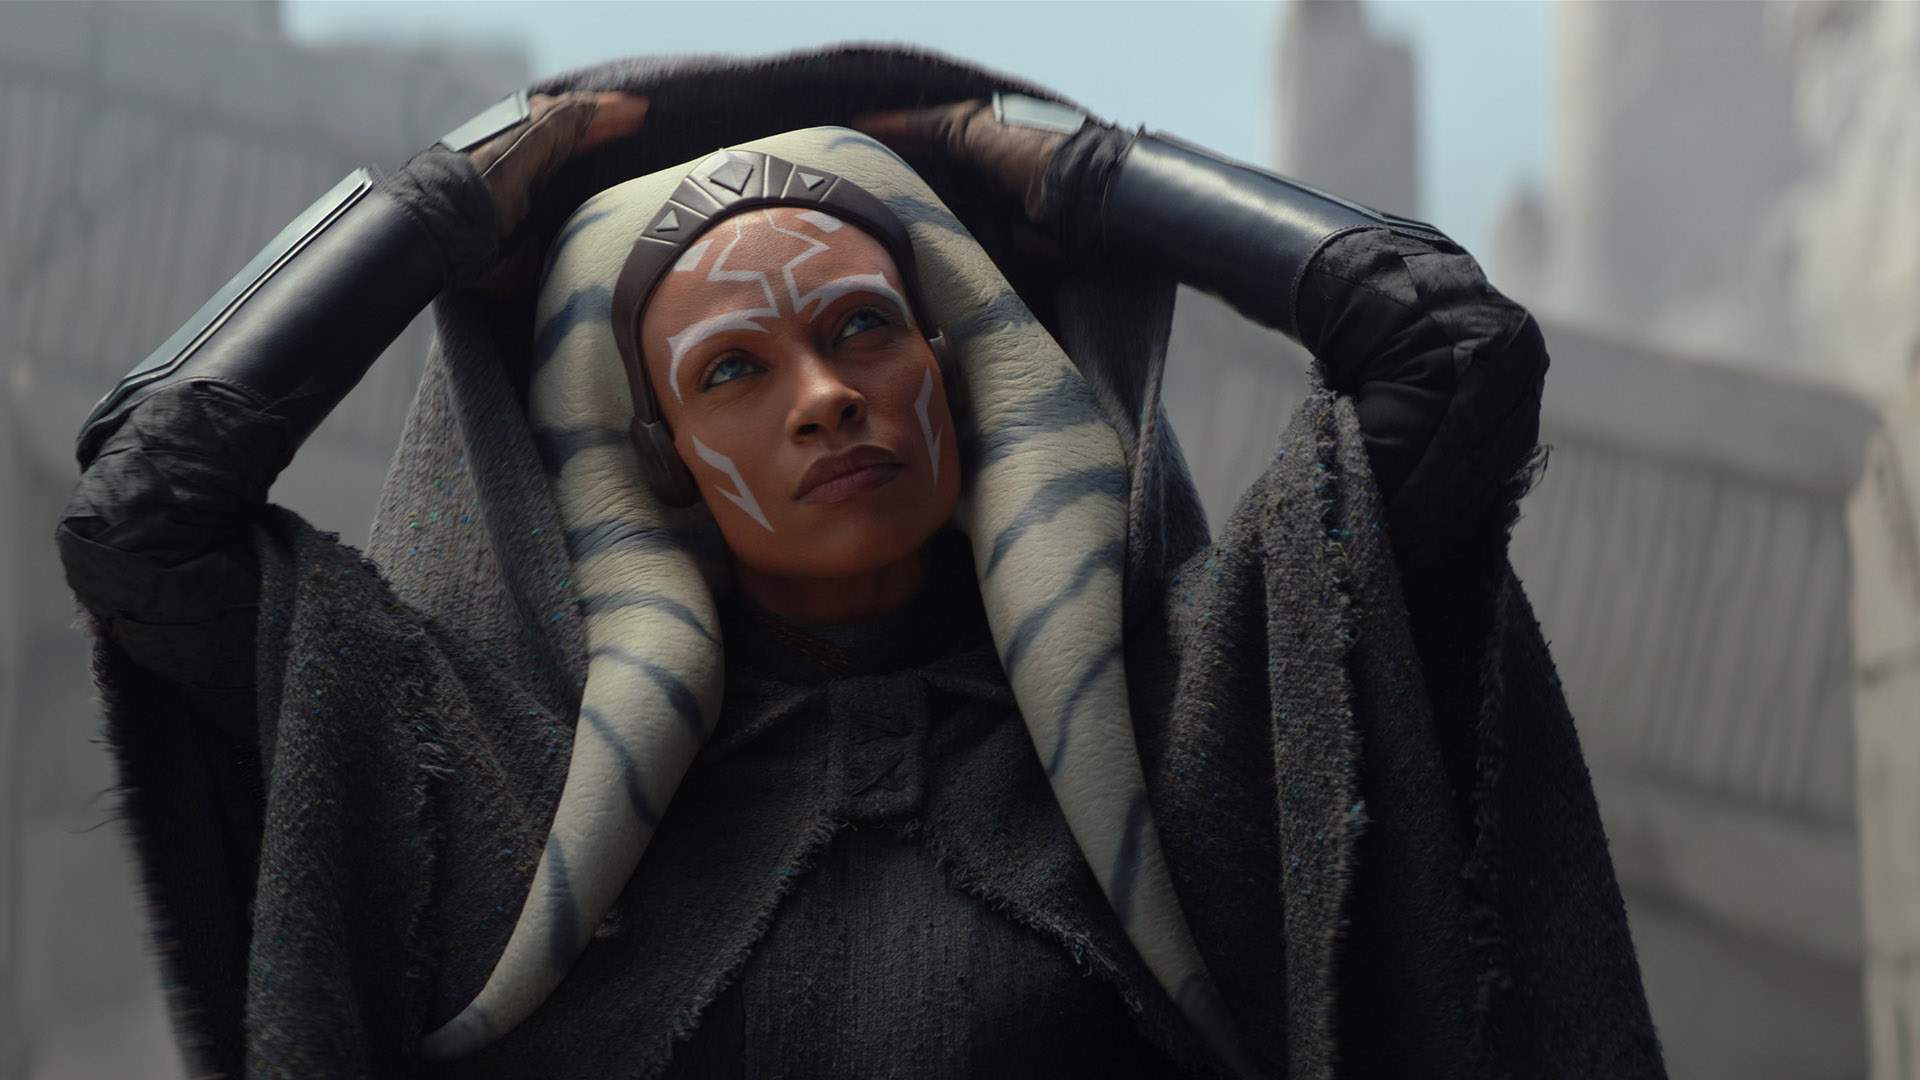 Disney+'s Next Big 'Star Wars' Series 'Ahsoka' Will Hit Your Streaming Queue in August